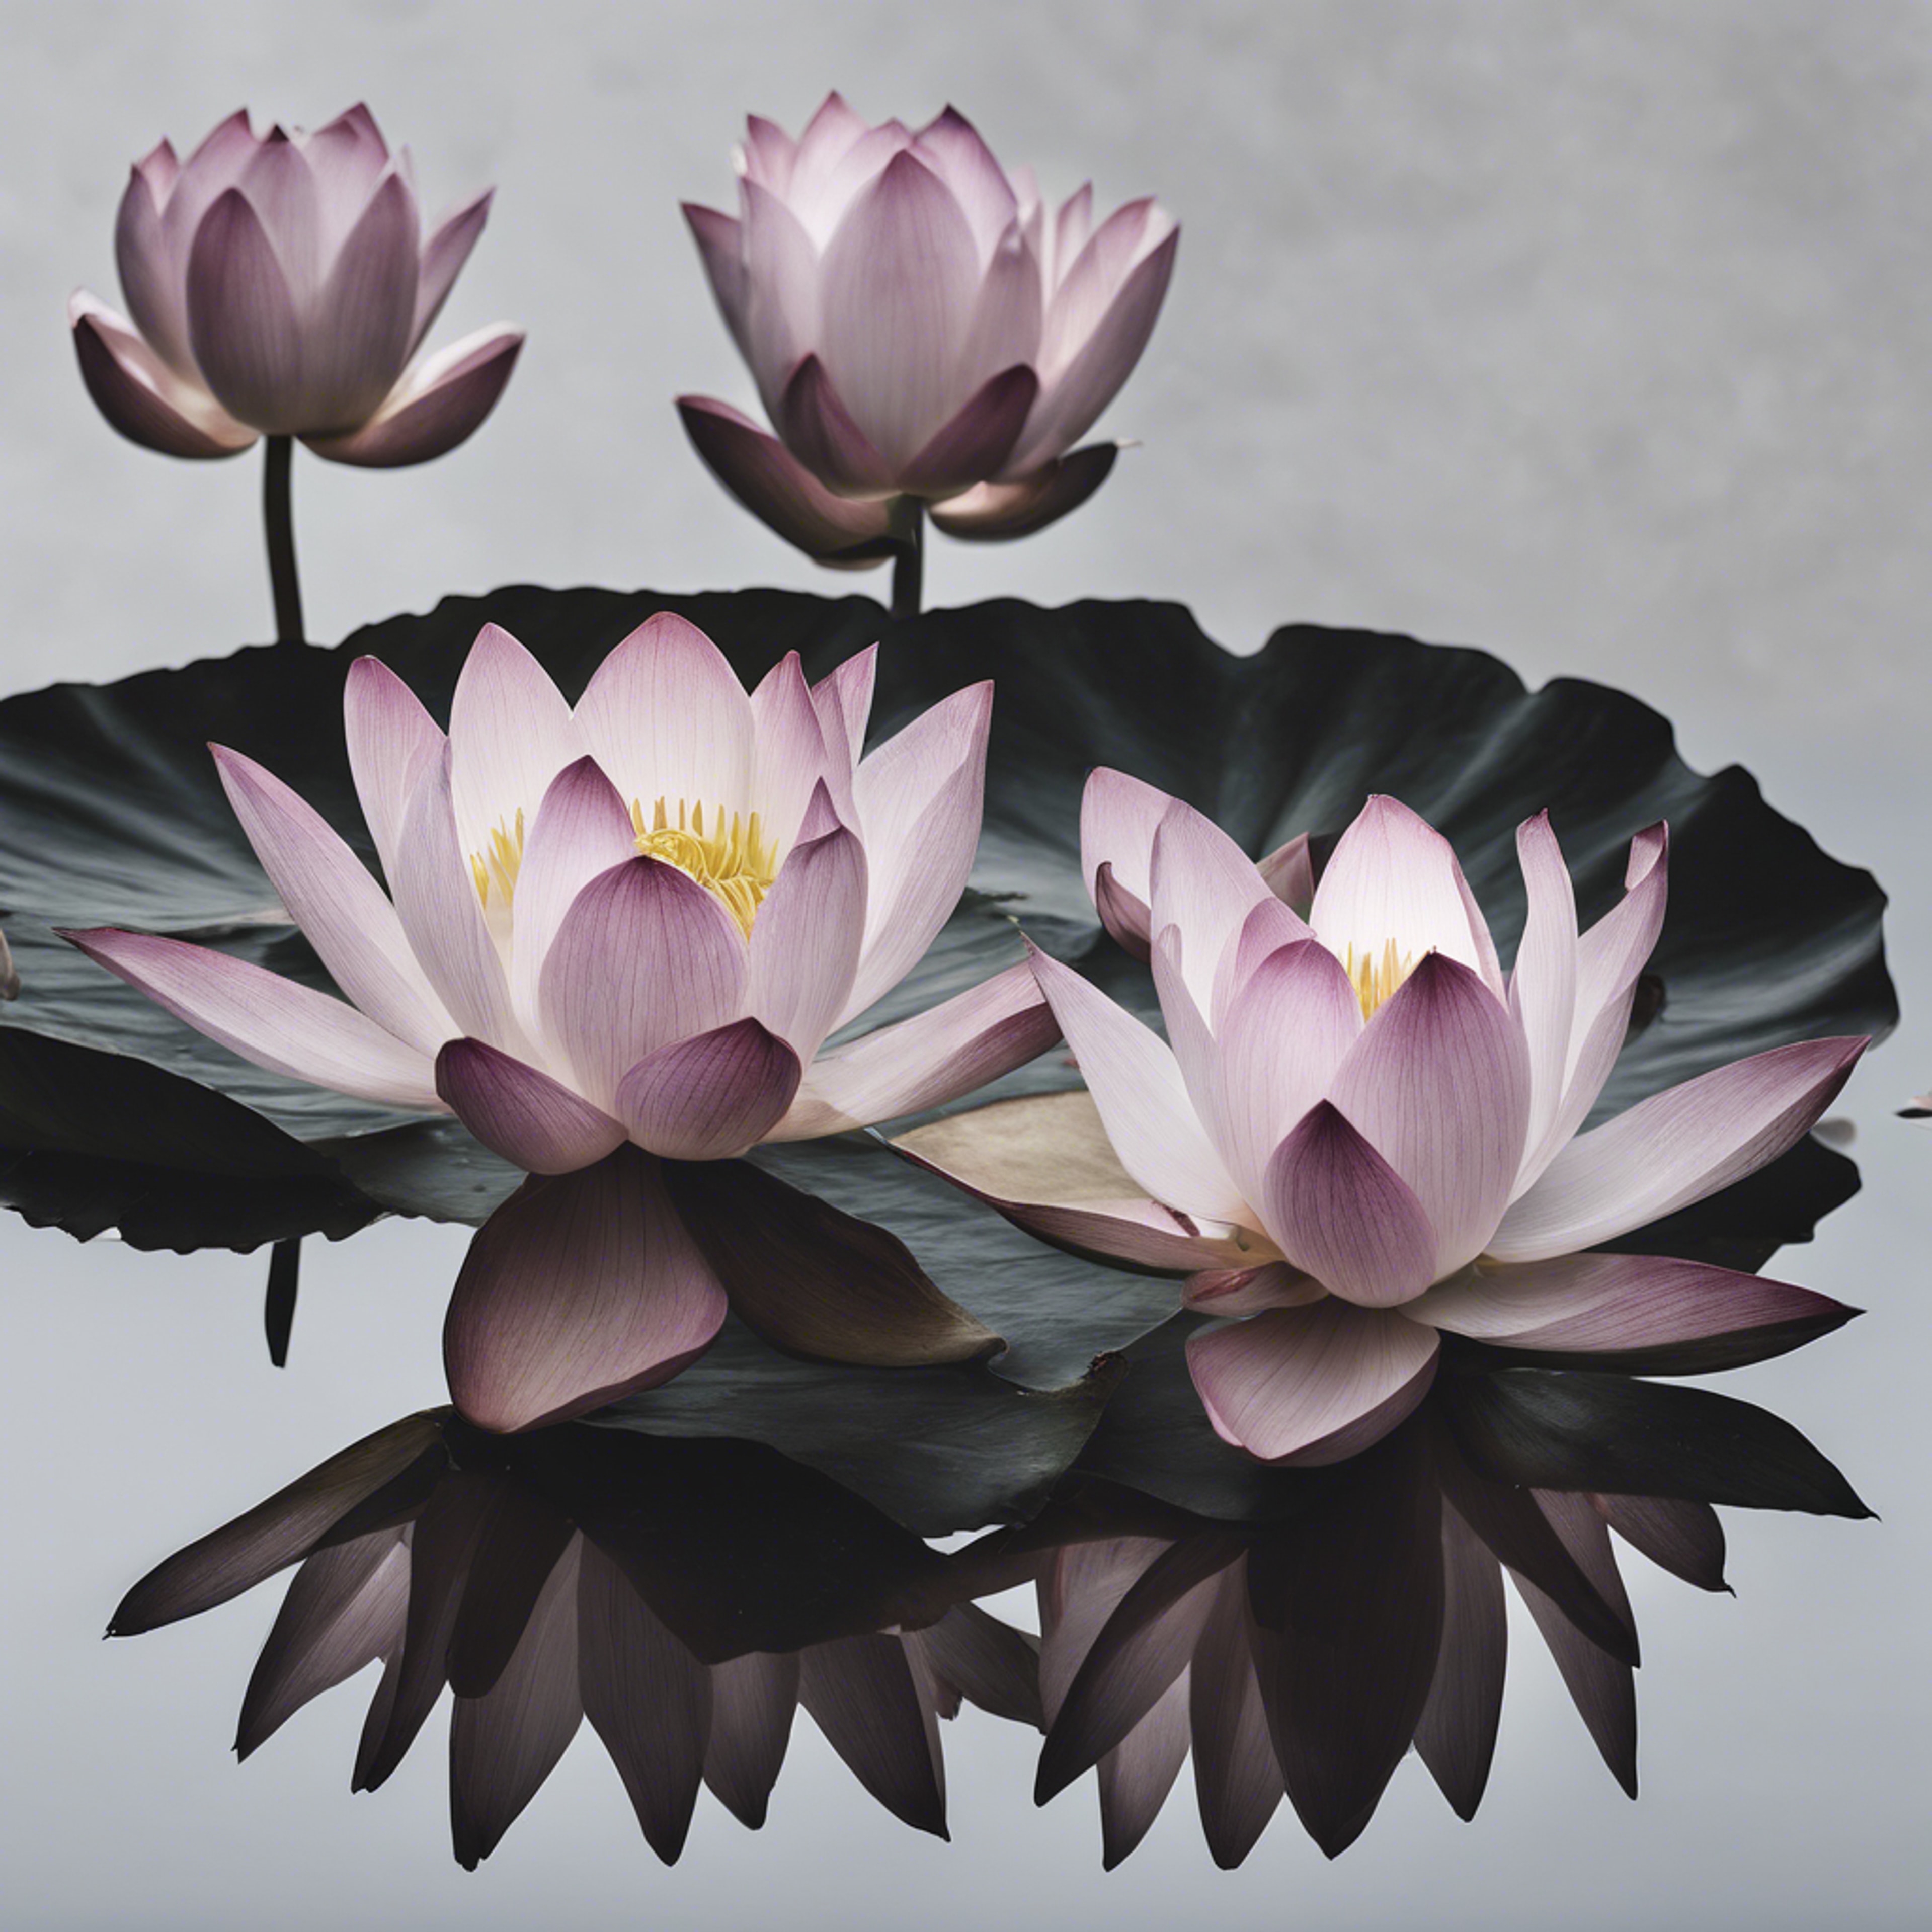 Dark lotuses floating elegantly on a textured white canvas. Tapet[326d2c6a66b946e99dbc]